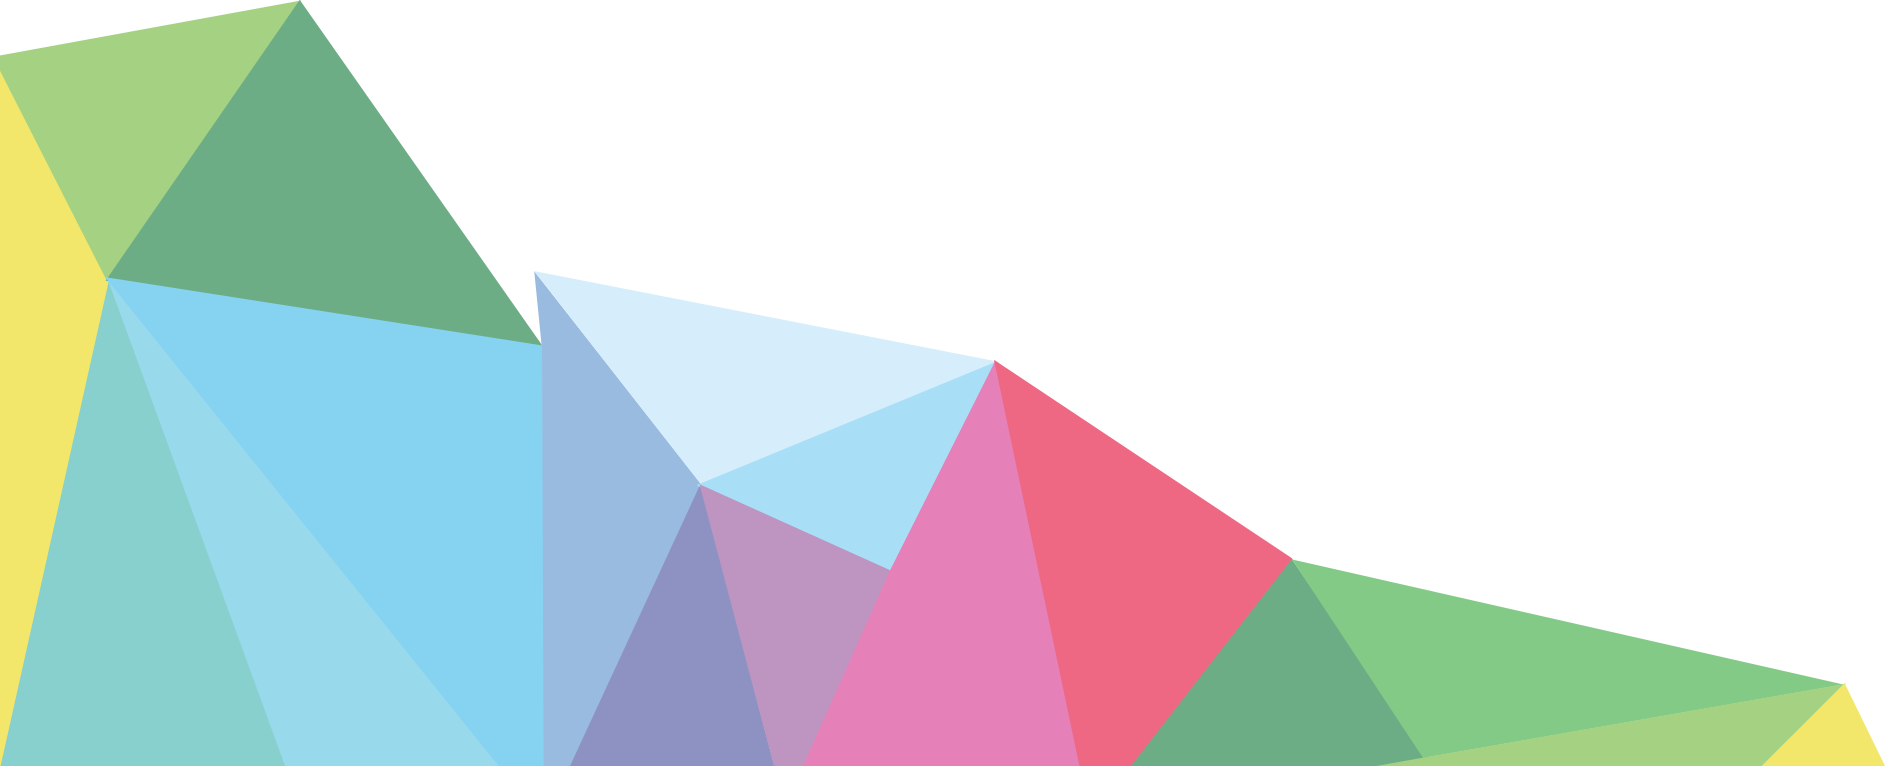 A Colorful Triangle Pattern On A Black Background